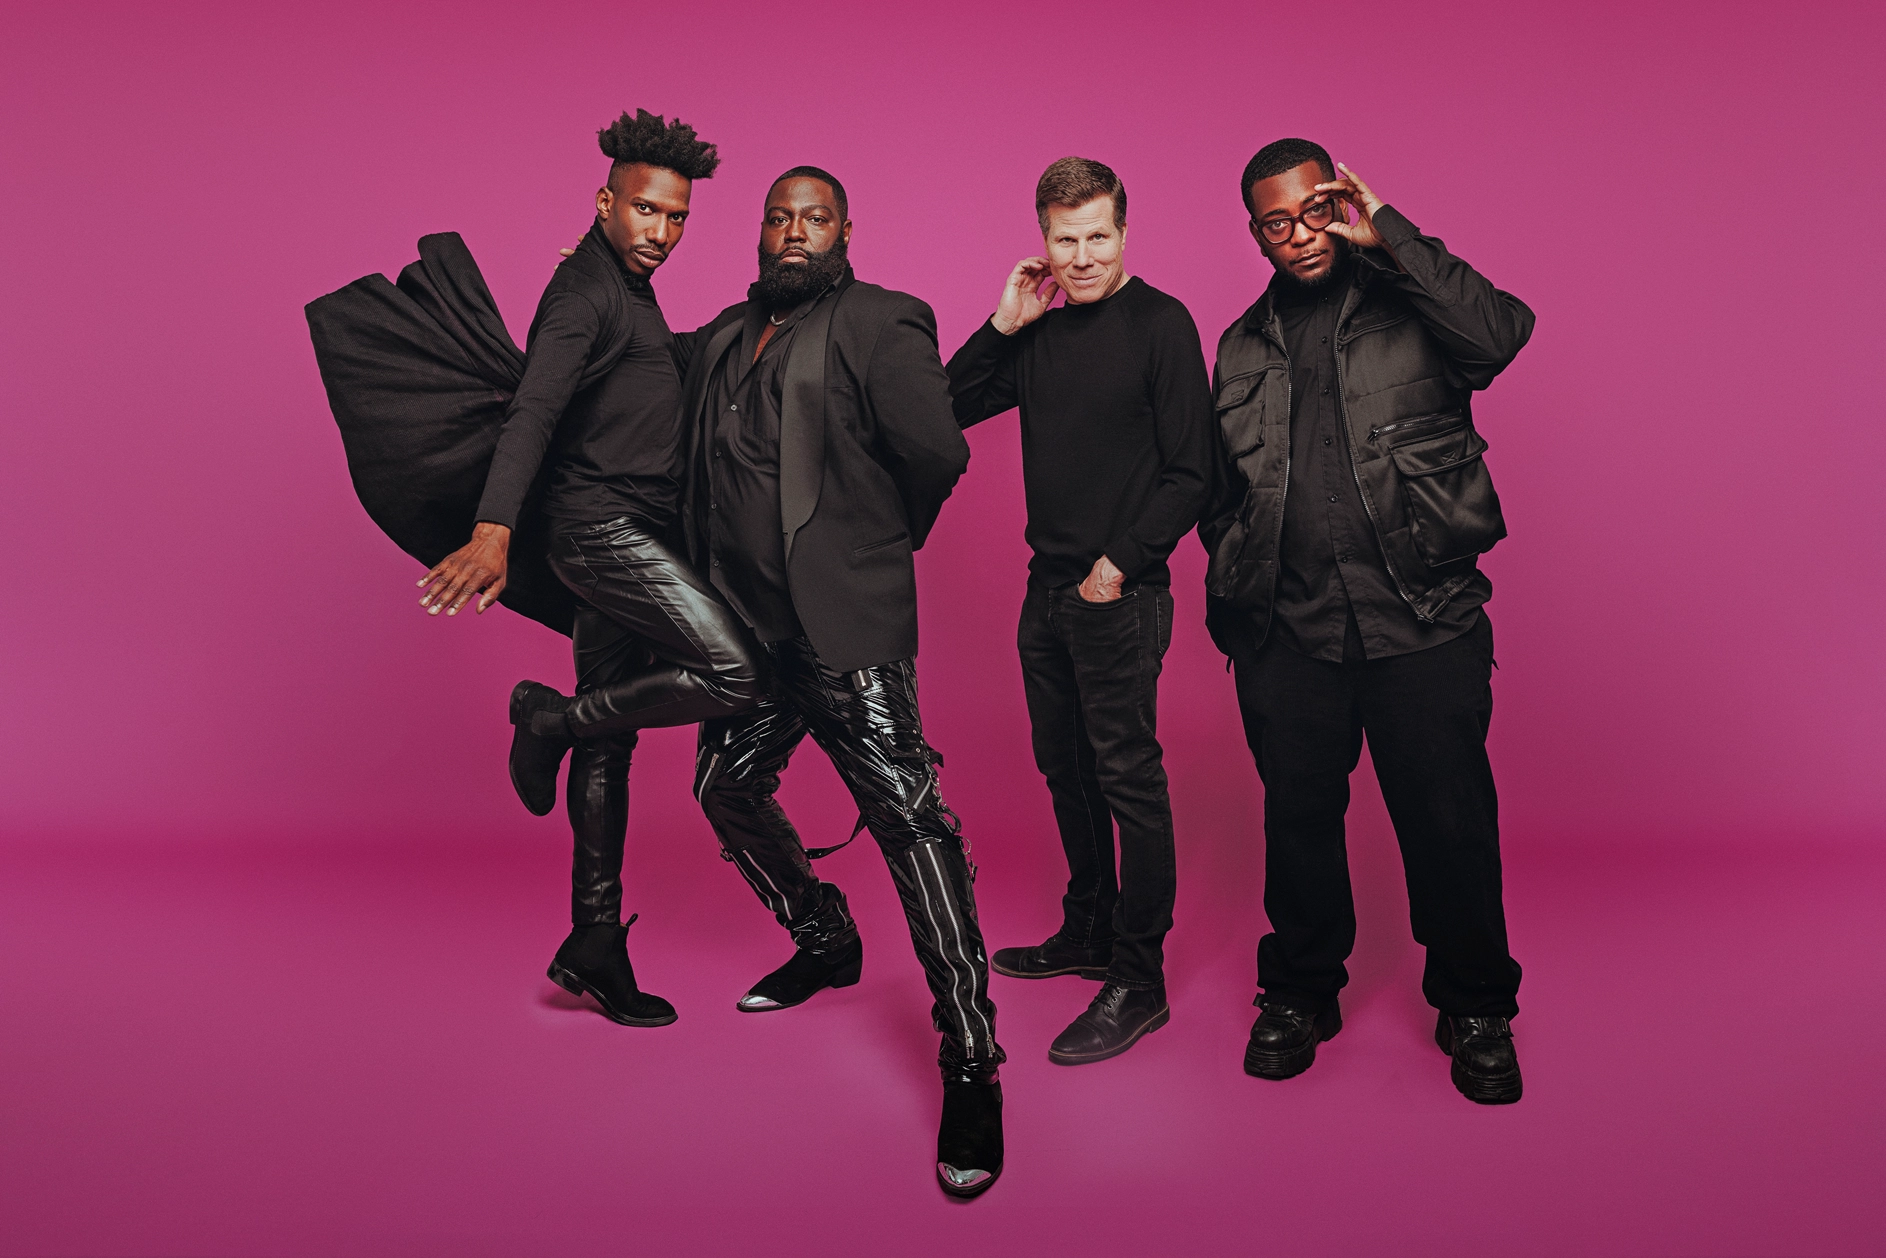 Four men dressed all in black pose against a magenta backdrop. Omari Wiles balances on one leg as his cape flies up behind him, while Arturo Lyons leans into him, one knee bent and the other leg extended long in front. Bill Rauch, the only white man in the group, smiles a little as he brings a hand to the side of his face. To his left, Zhailon Levingston looks seriously at the camera, adjusting his black rimmed glasses with one hand.